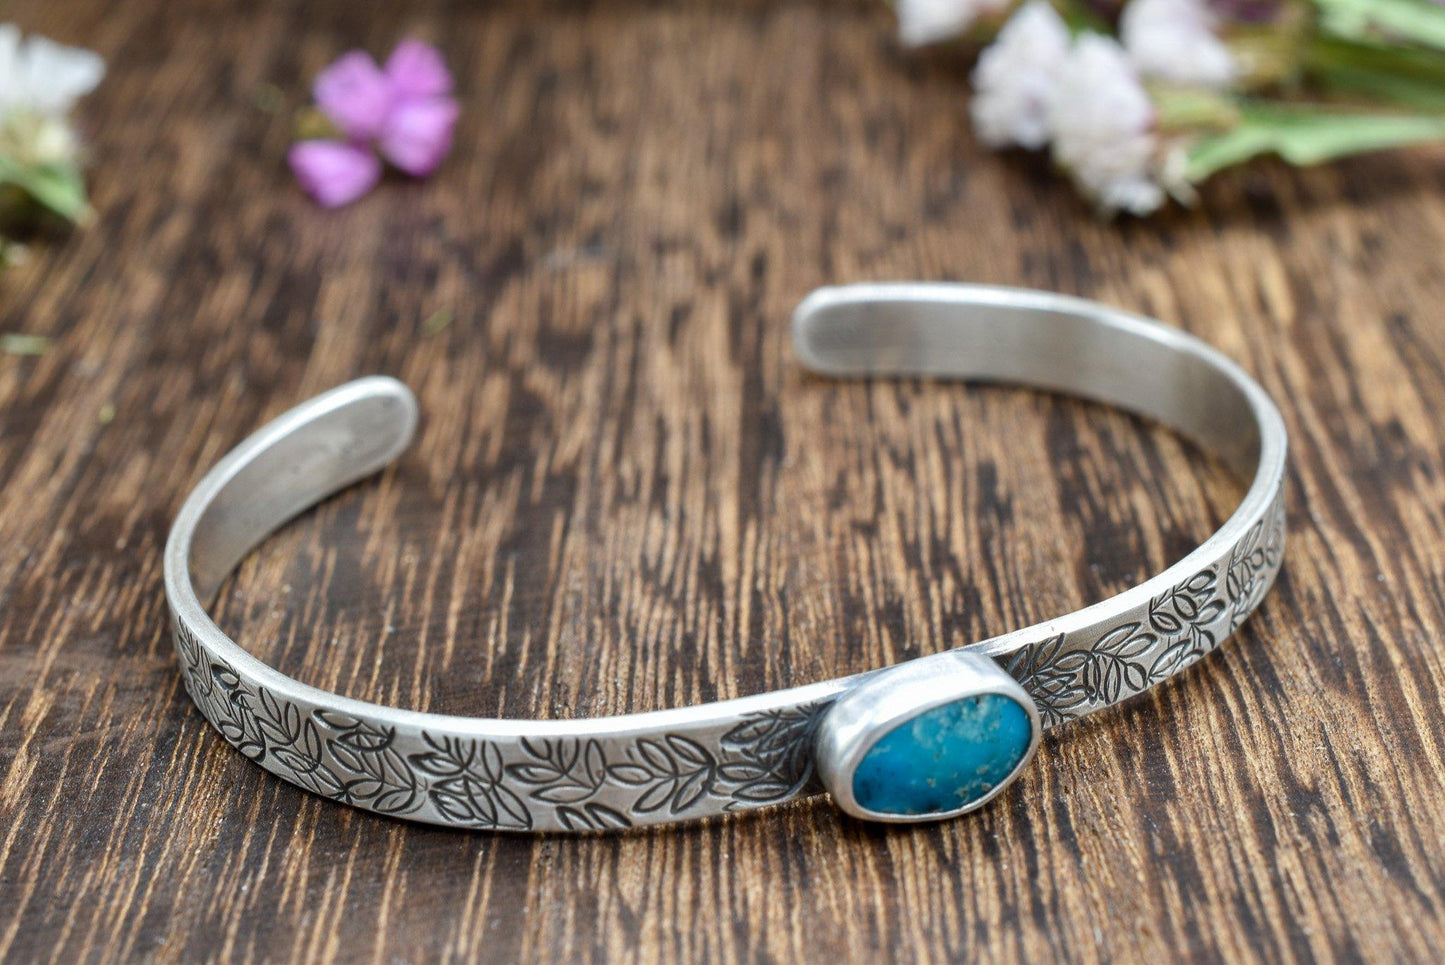 Turquoise Cuff Bracelet with Stamped Petals Design